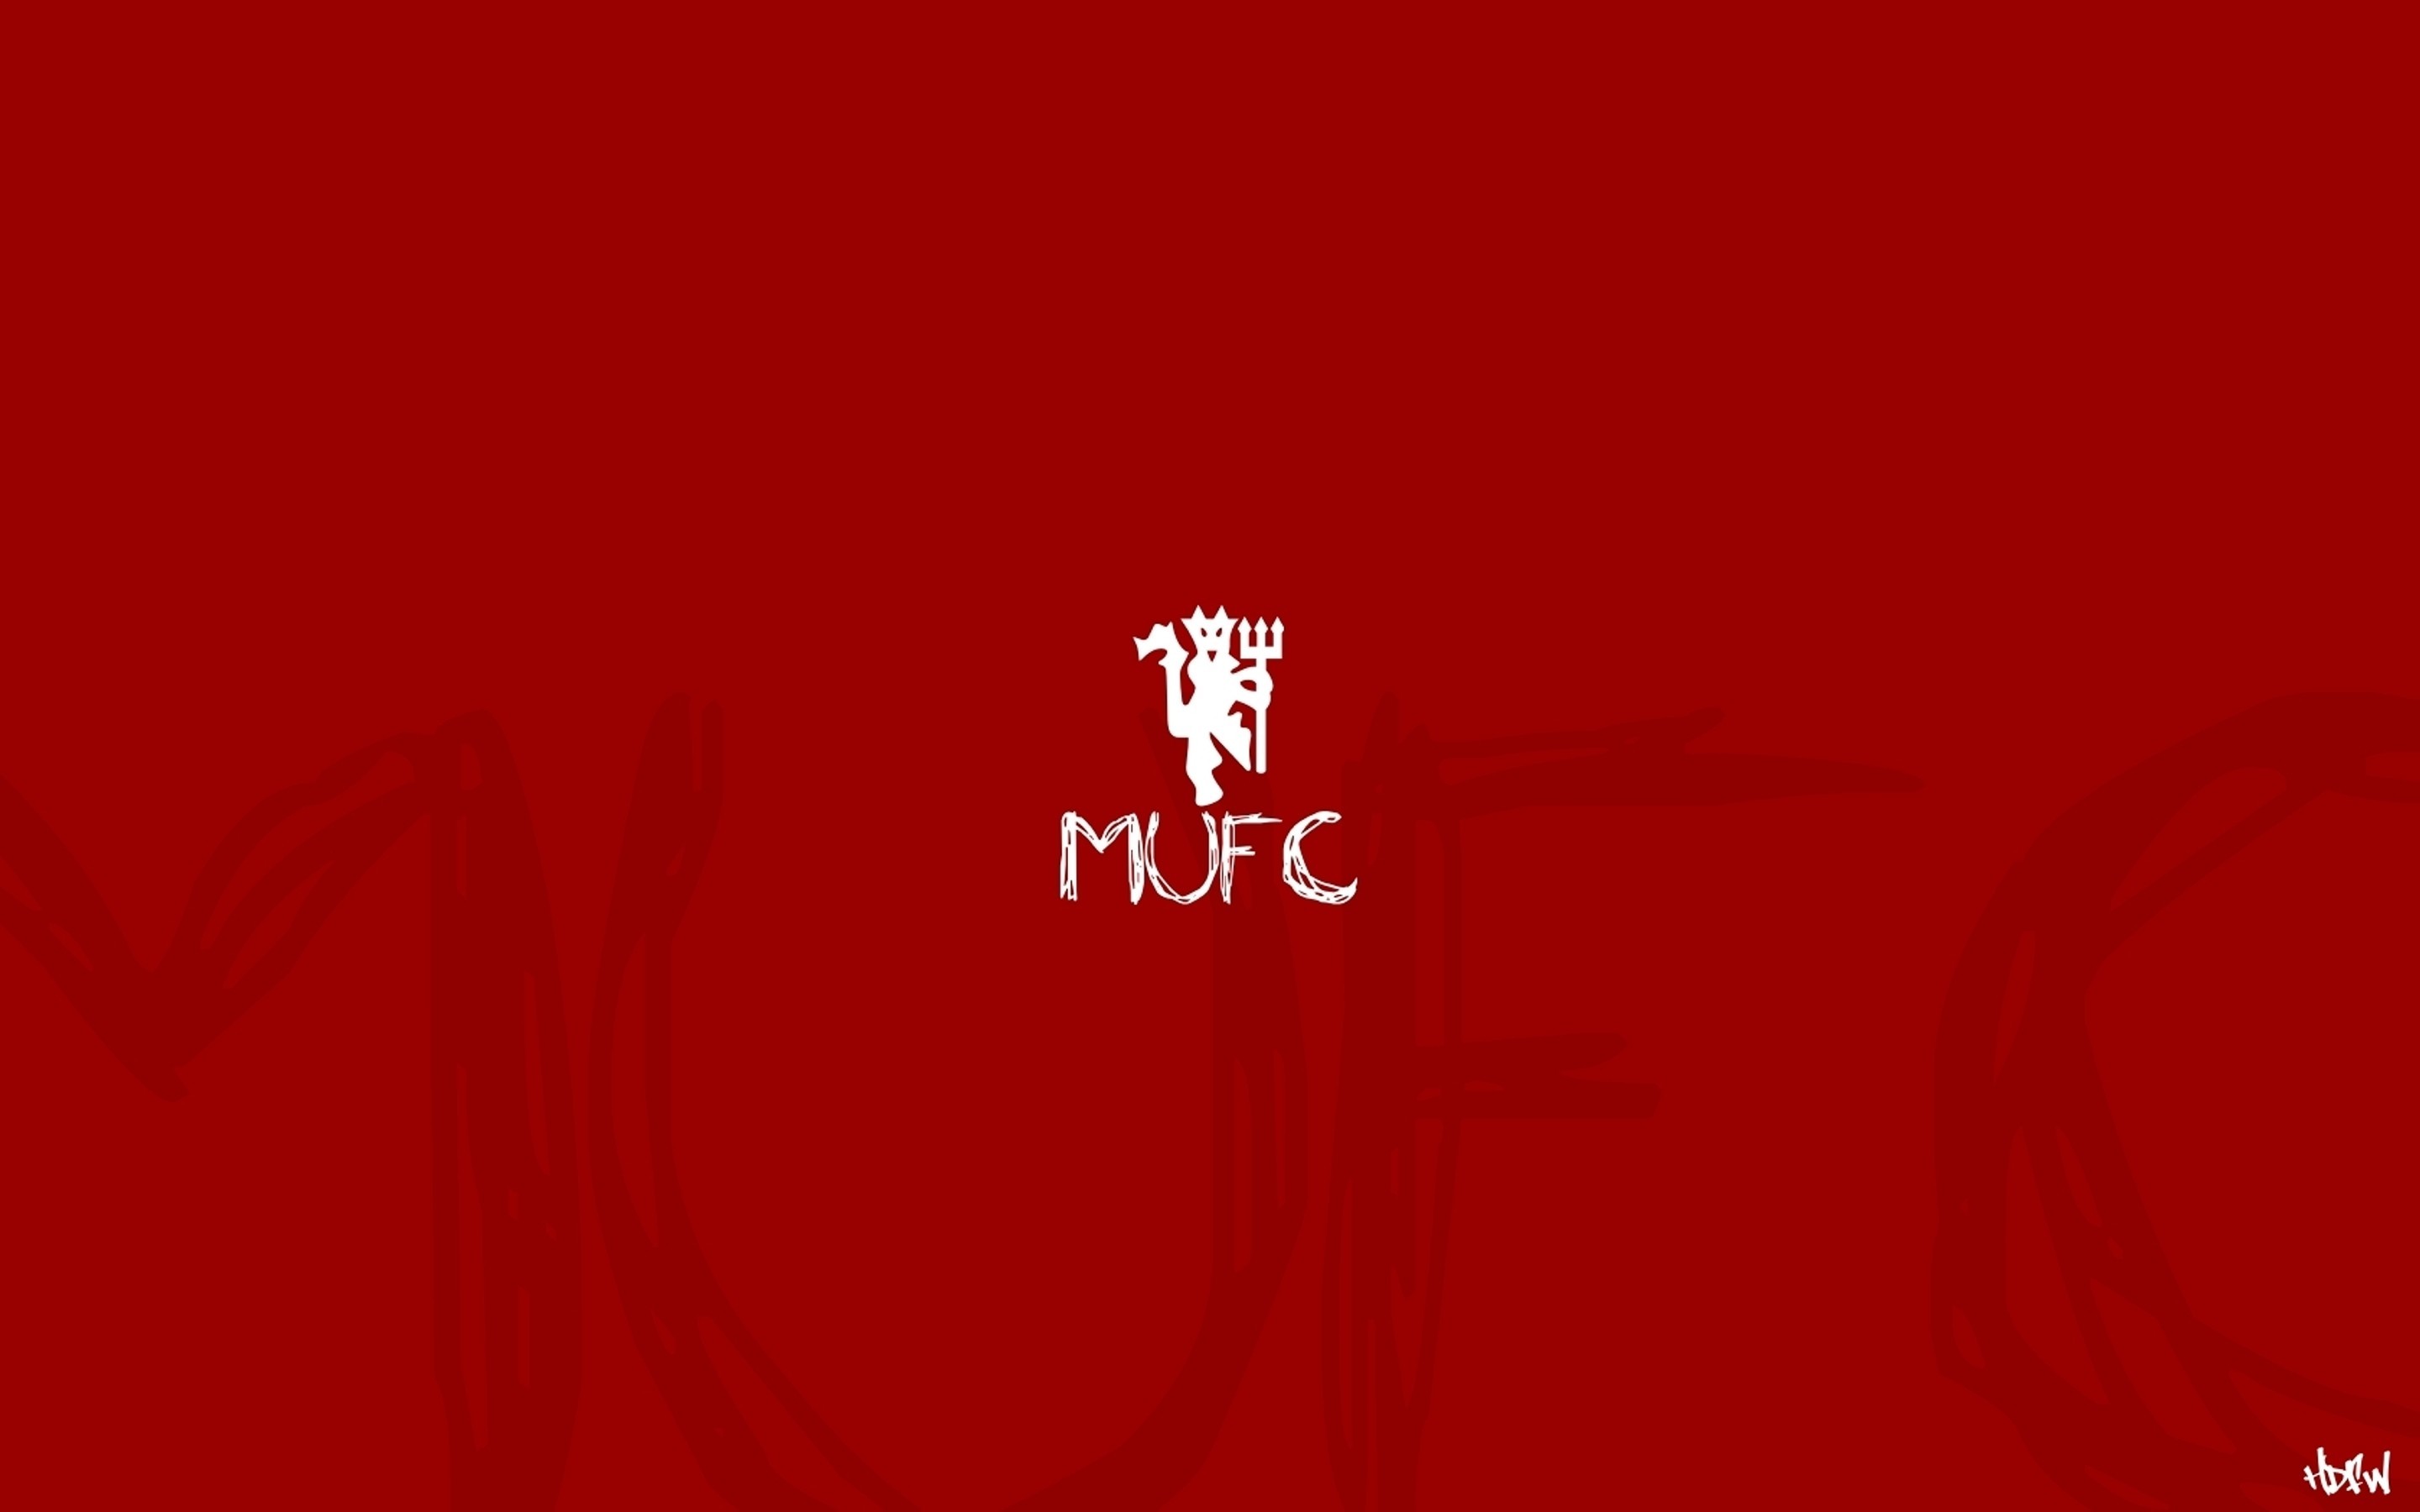 2000x1125 Awesome Manchester United Wallpaper Hd 2022 2880x1800